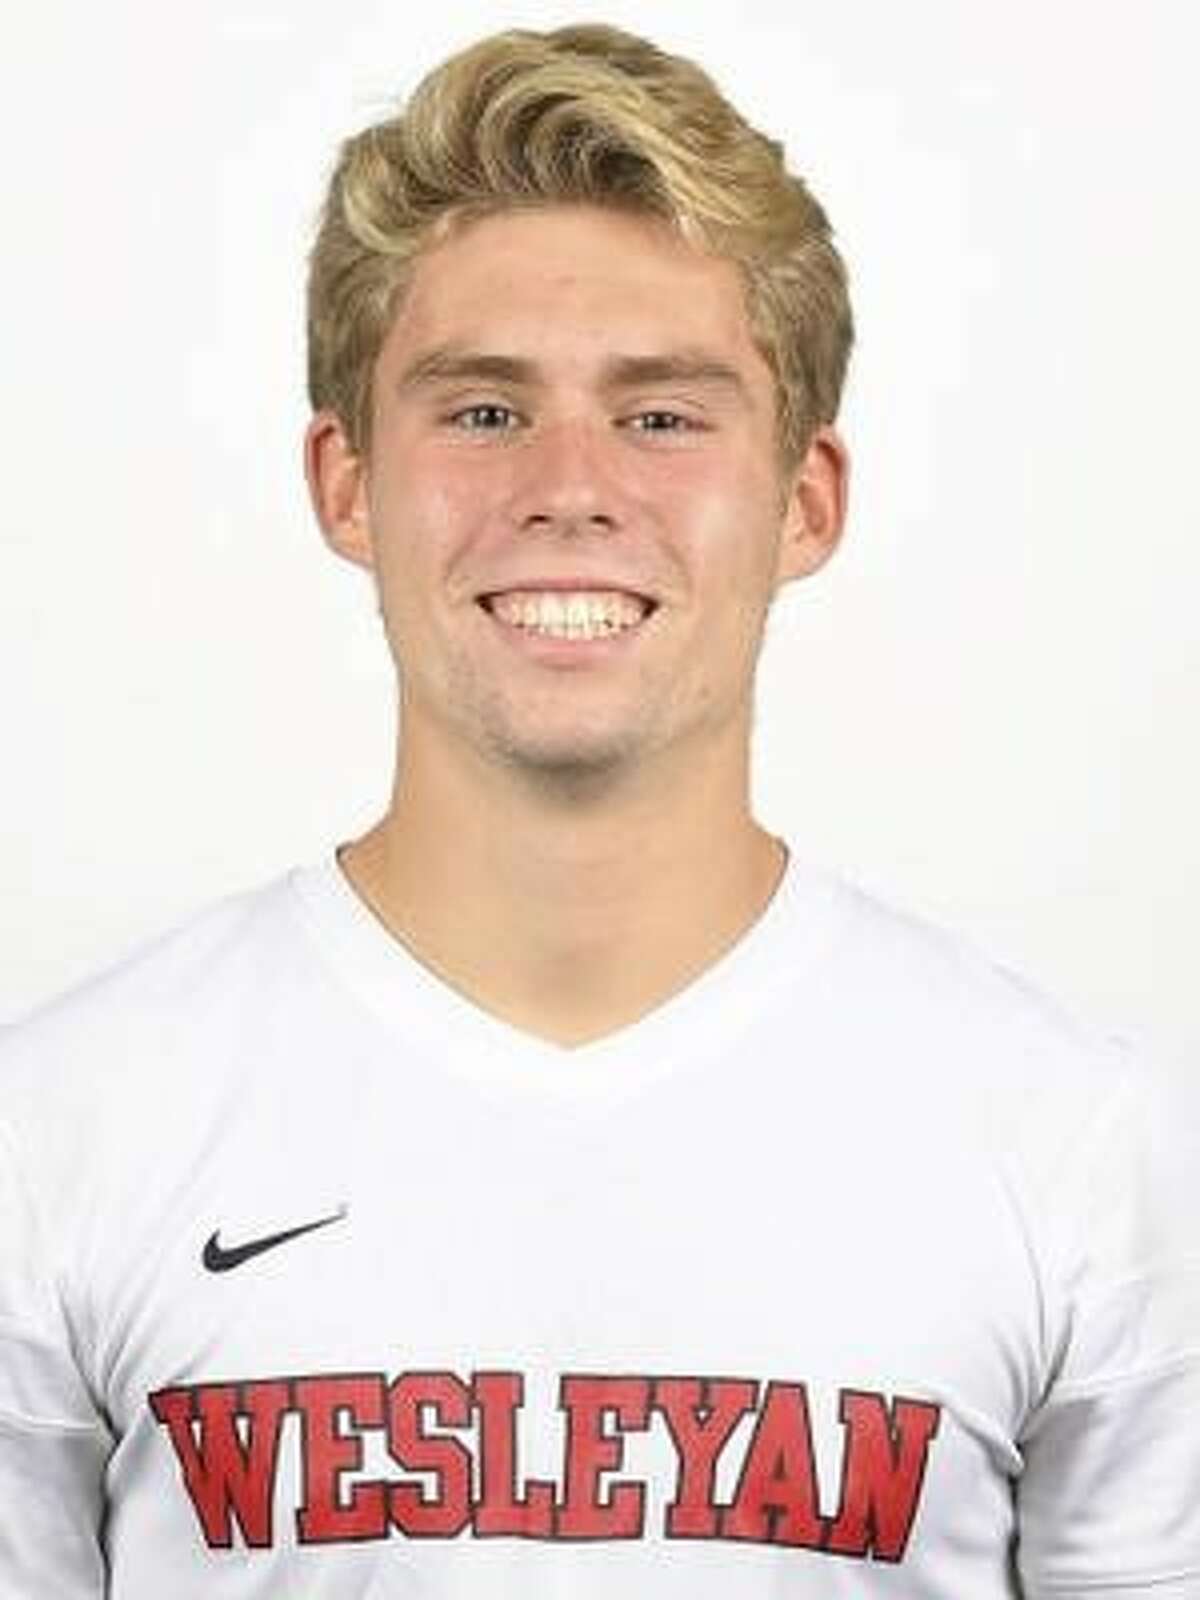 Wesleyan University junior Jack Seivwright died following a skiing accident Sunday, according to university officials. Seivwright, who played soccer for Wesleyan during the 2020-21 season, was studying abroad at the time of his death, officials said.